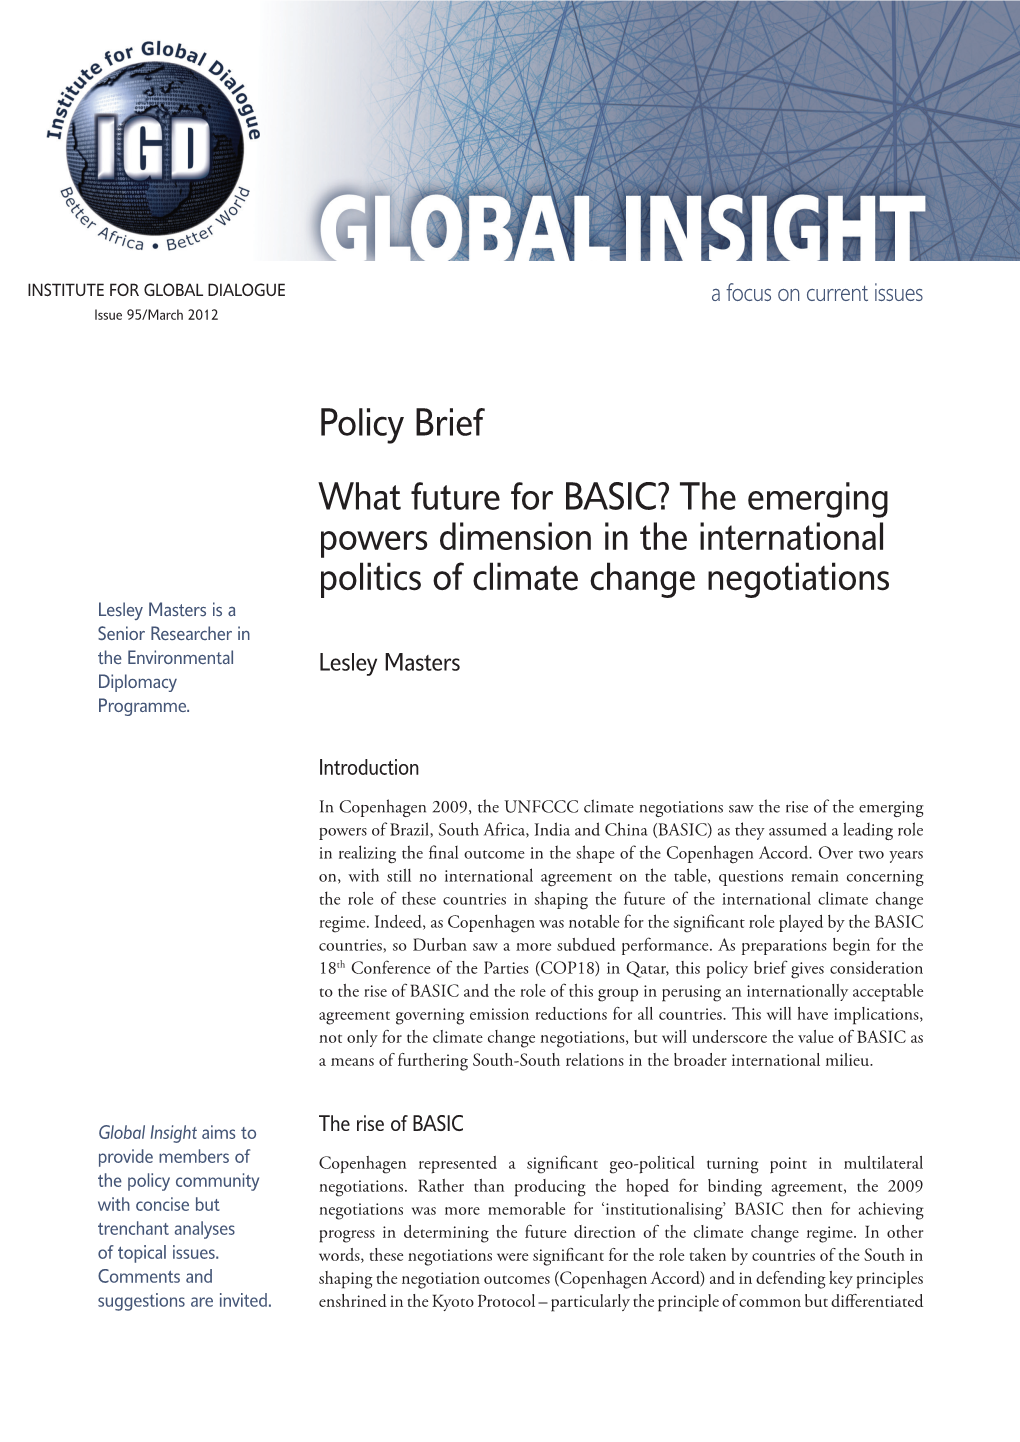 Policy Brief What Future for BASIC? the Emerging Powers Dimension in the International Politics of Climate Change Negotiations